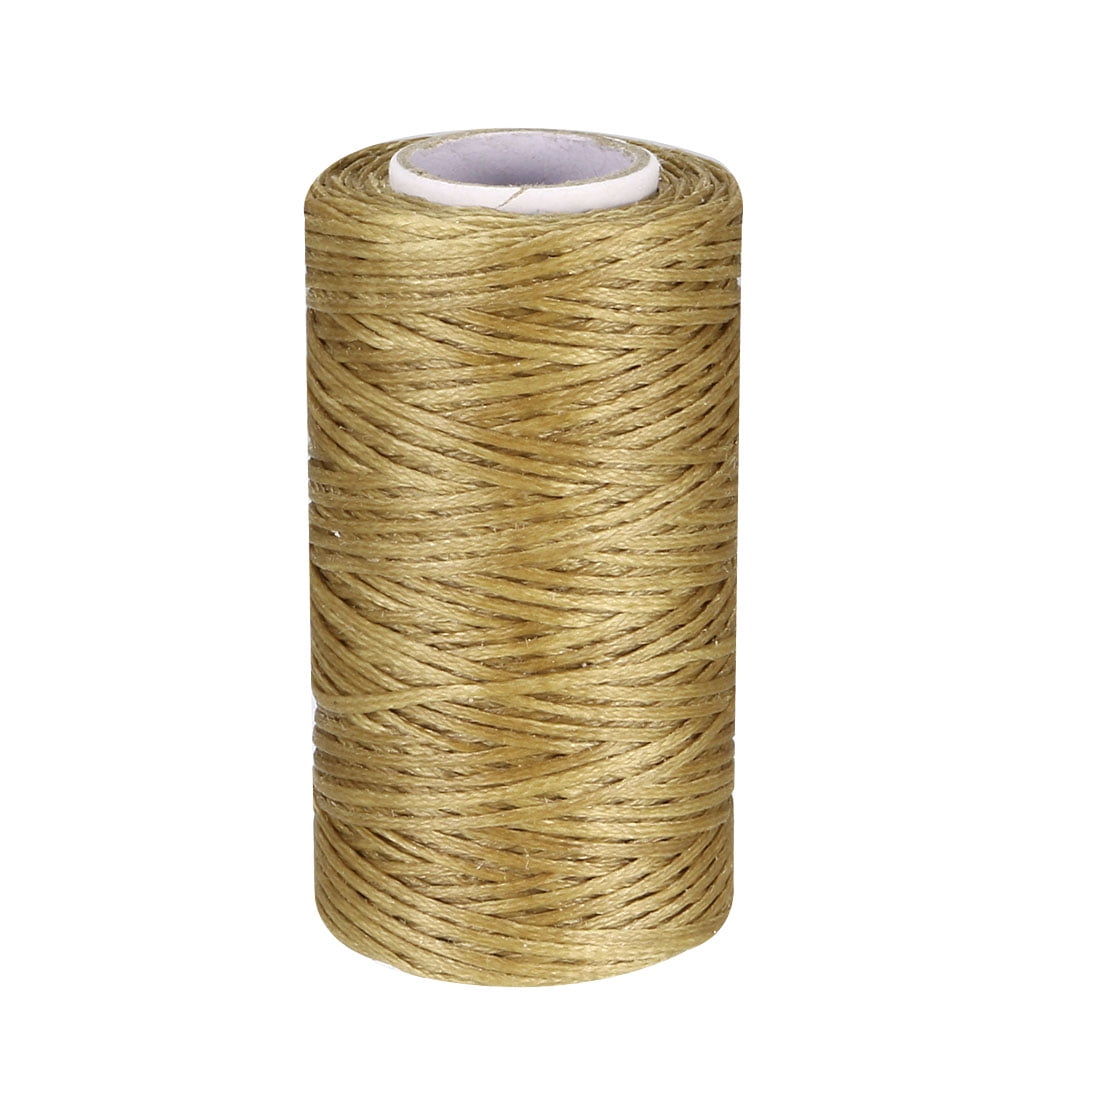 Waxed thread for leather • different sizes • CraftPoint Shop